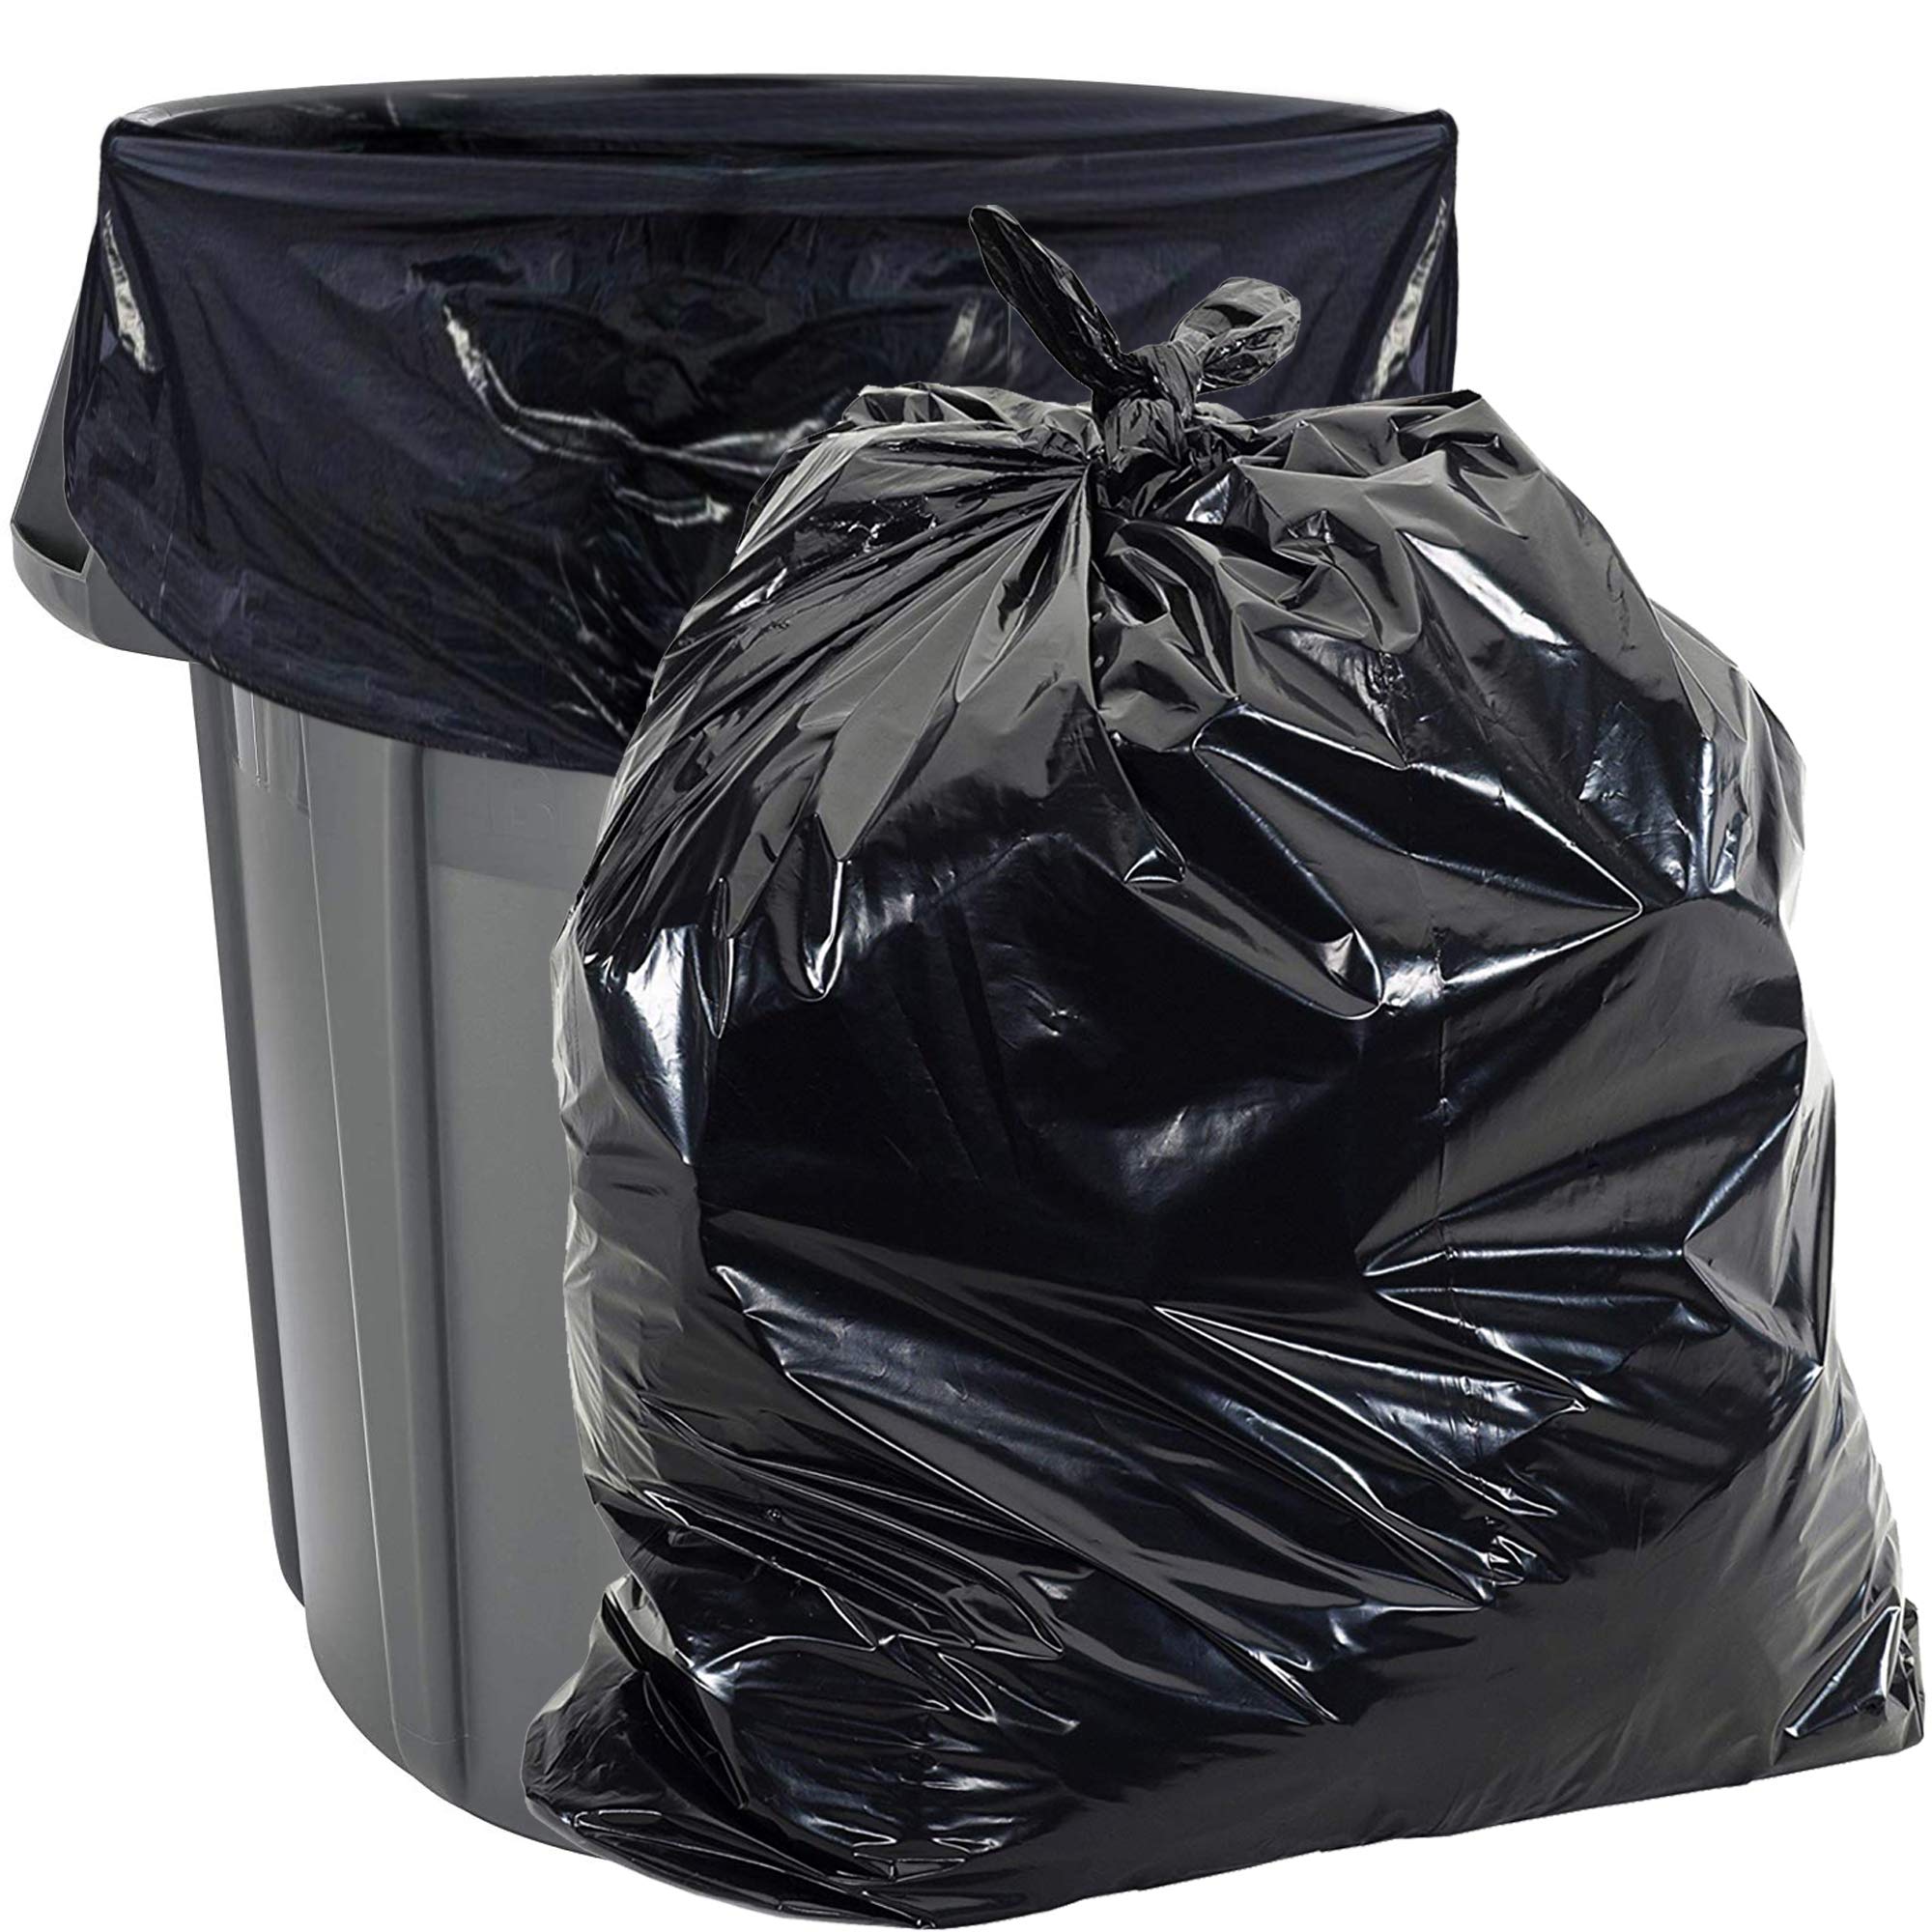 Aluf Plastics Heavy Duty 55 Gallon Trash Bags - (Value 50 Pack) - 1.5 MIL  equivalent Industrial Strength Plastic 35 x 55 for 50-55 Gal Cans -Fits  Toter, Rubbermaid Brute, Carlislie Bronco etc.